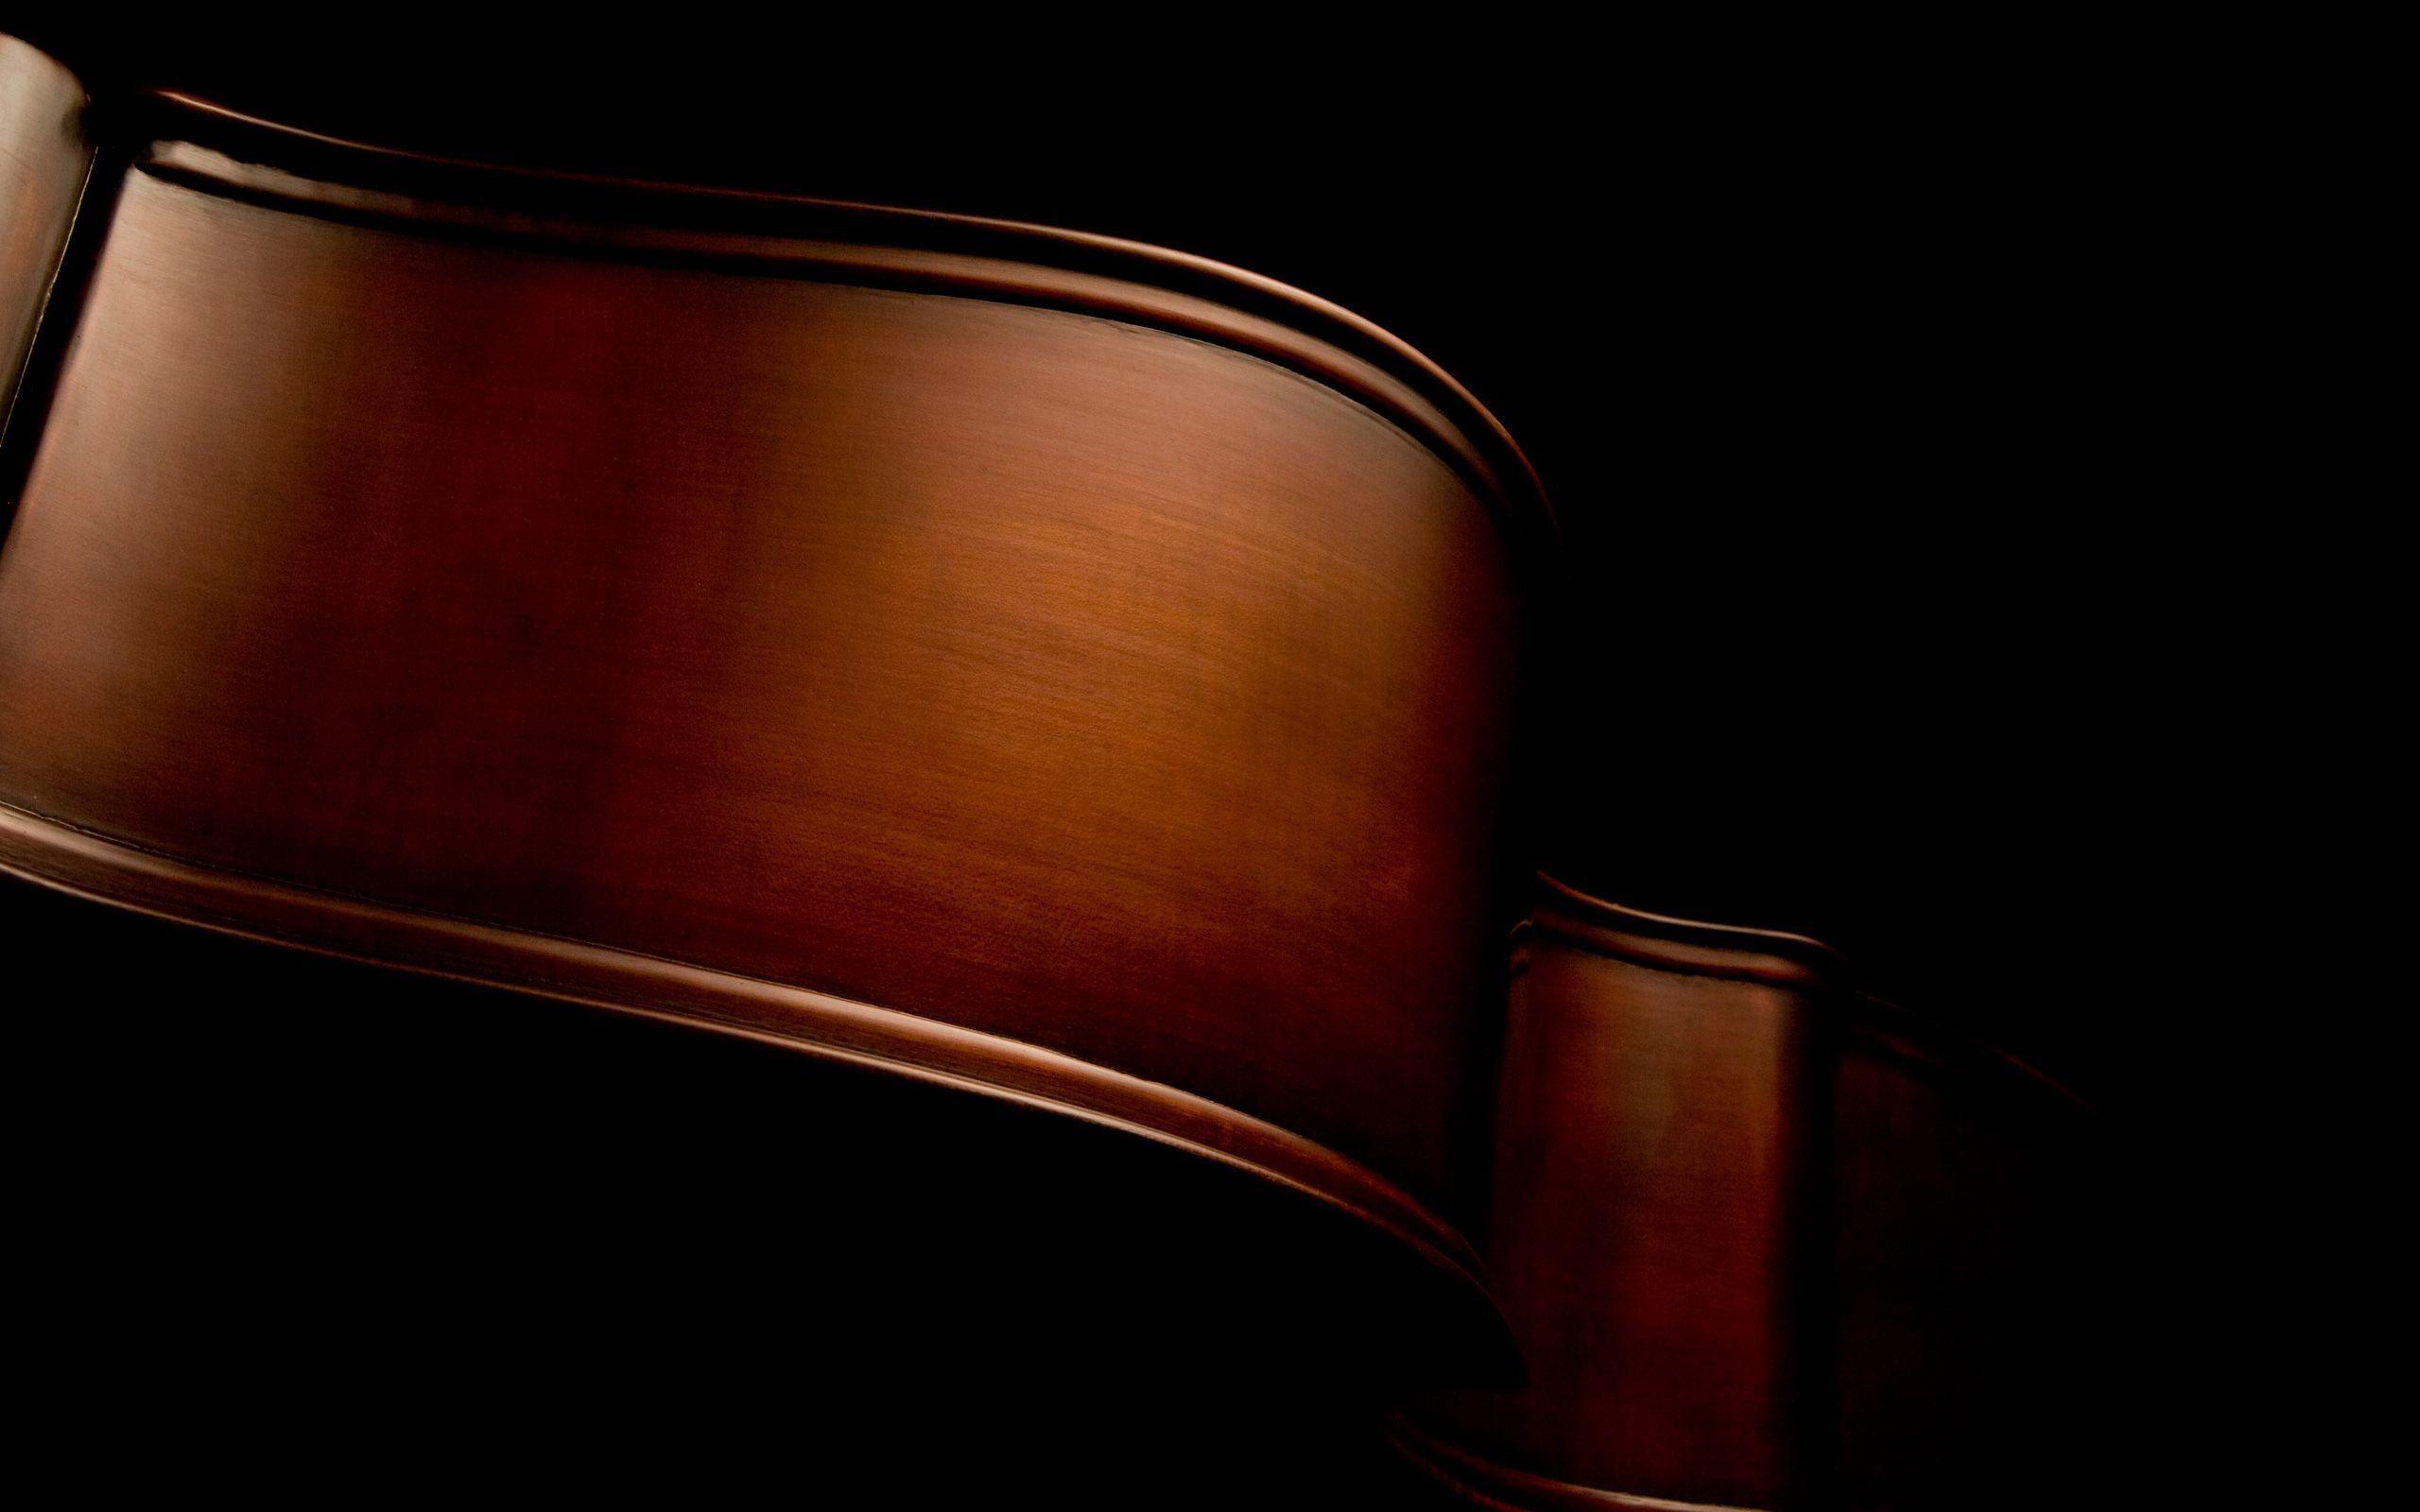 Cello Wallpaper Free 43592 HD Picture. Top Background Free